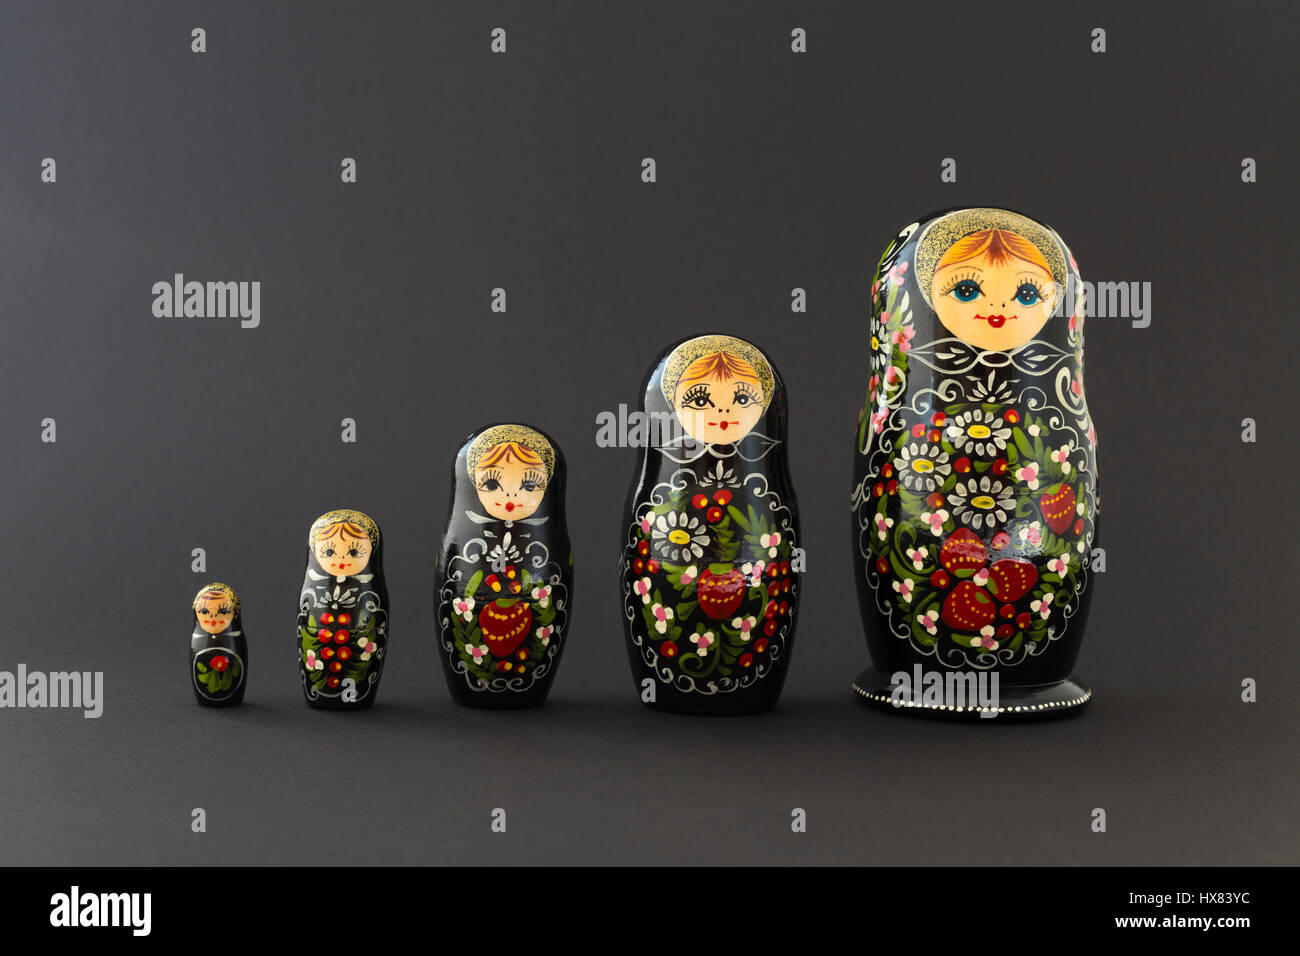 Beautiful black russian nesting dolls (matryoshka dolls) with white, green and red painting in front of dark background Stock Photo